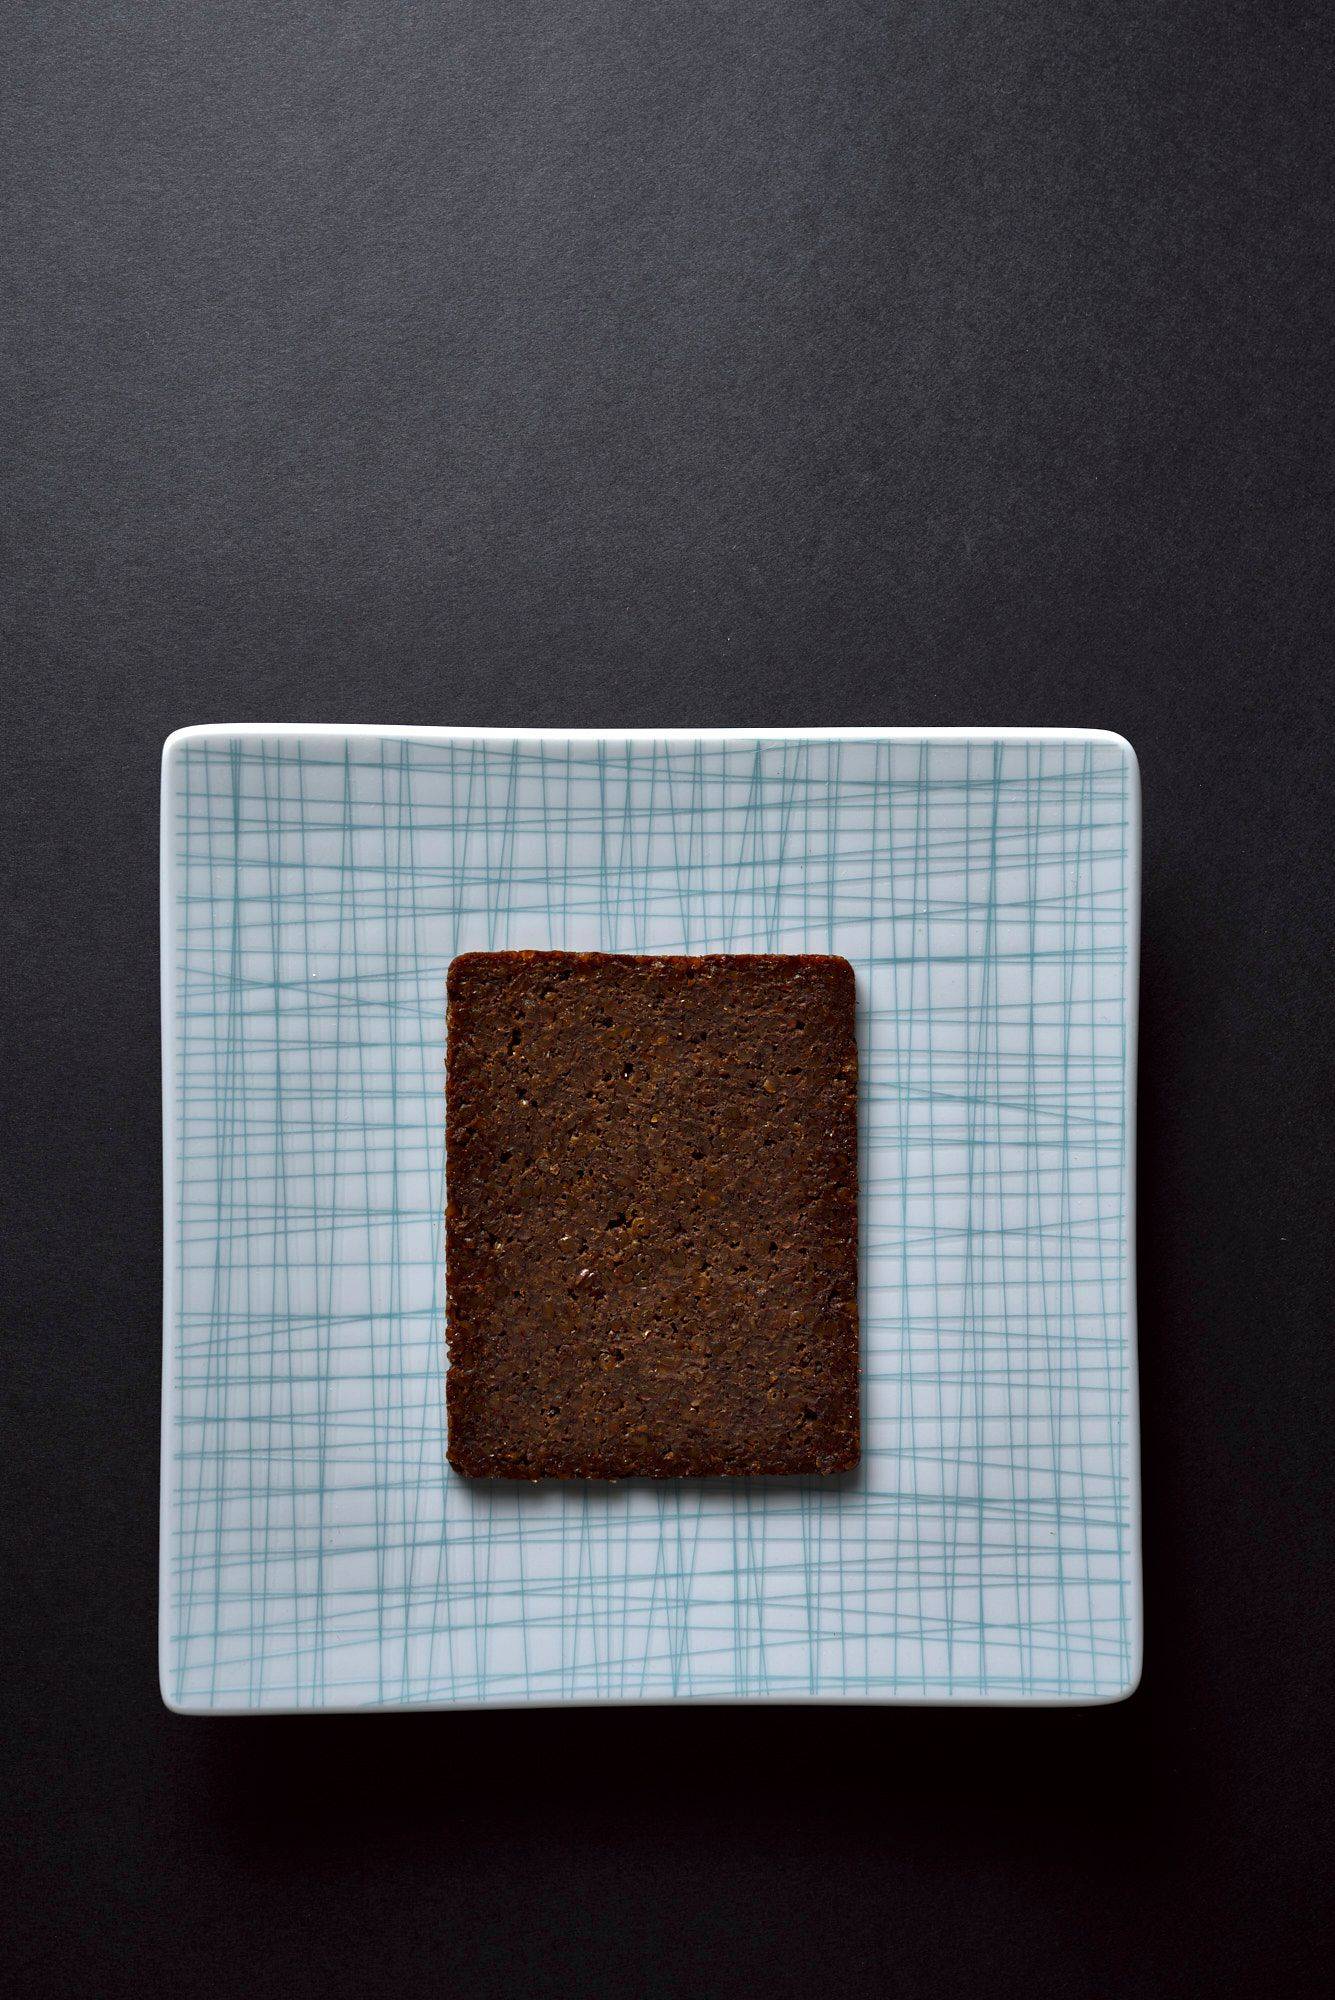 a slice of pumpernickel bread on a plate with black background